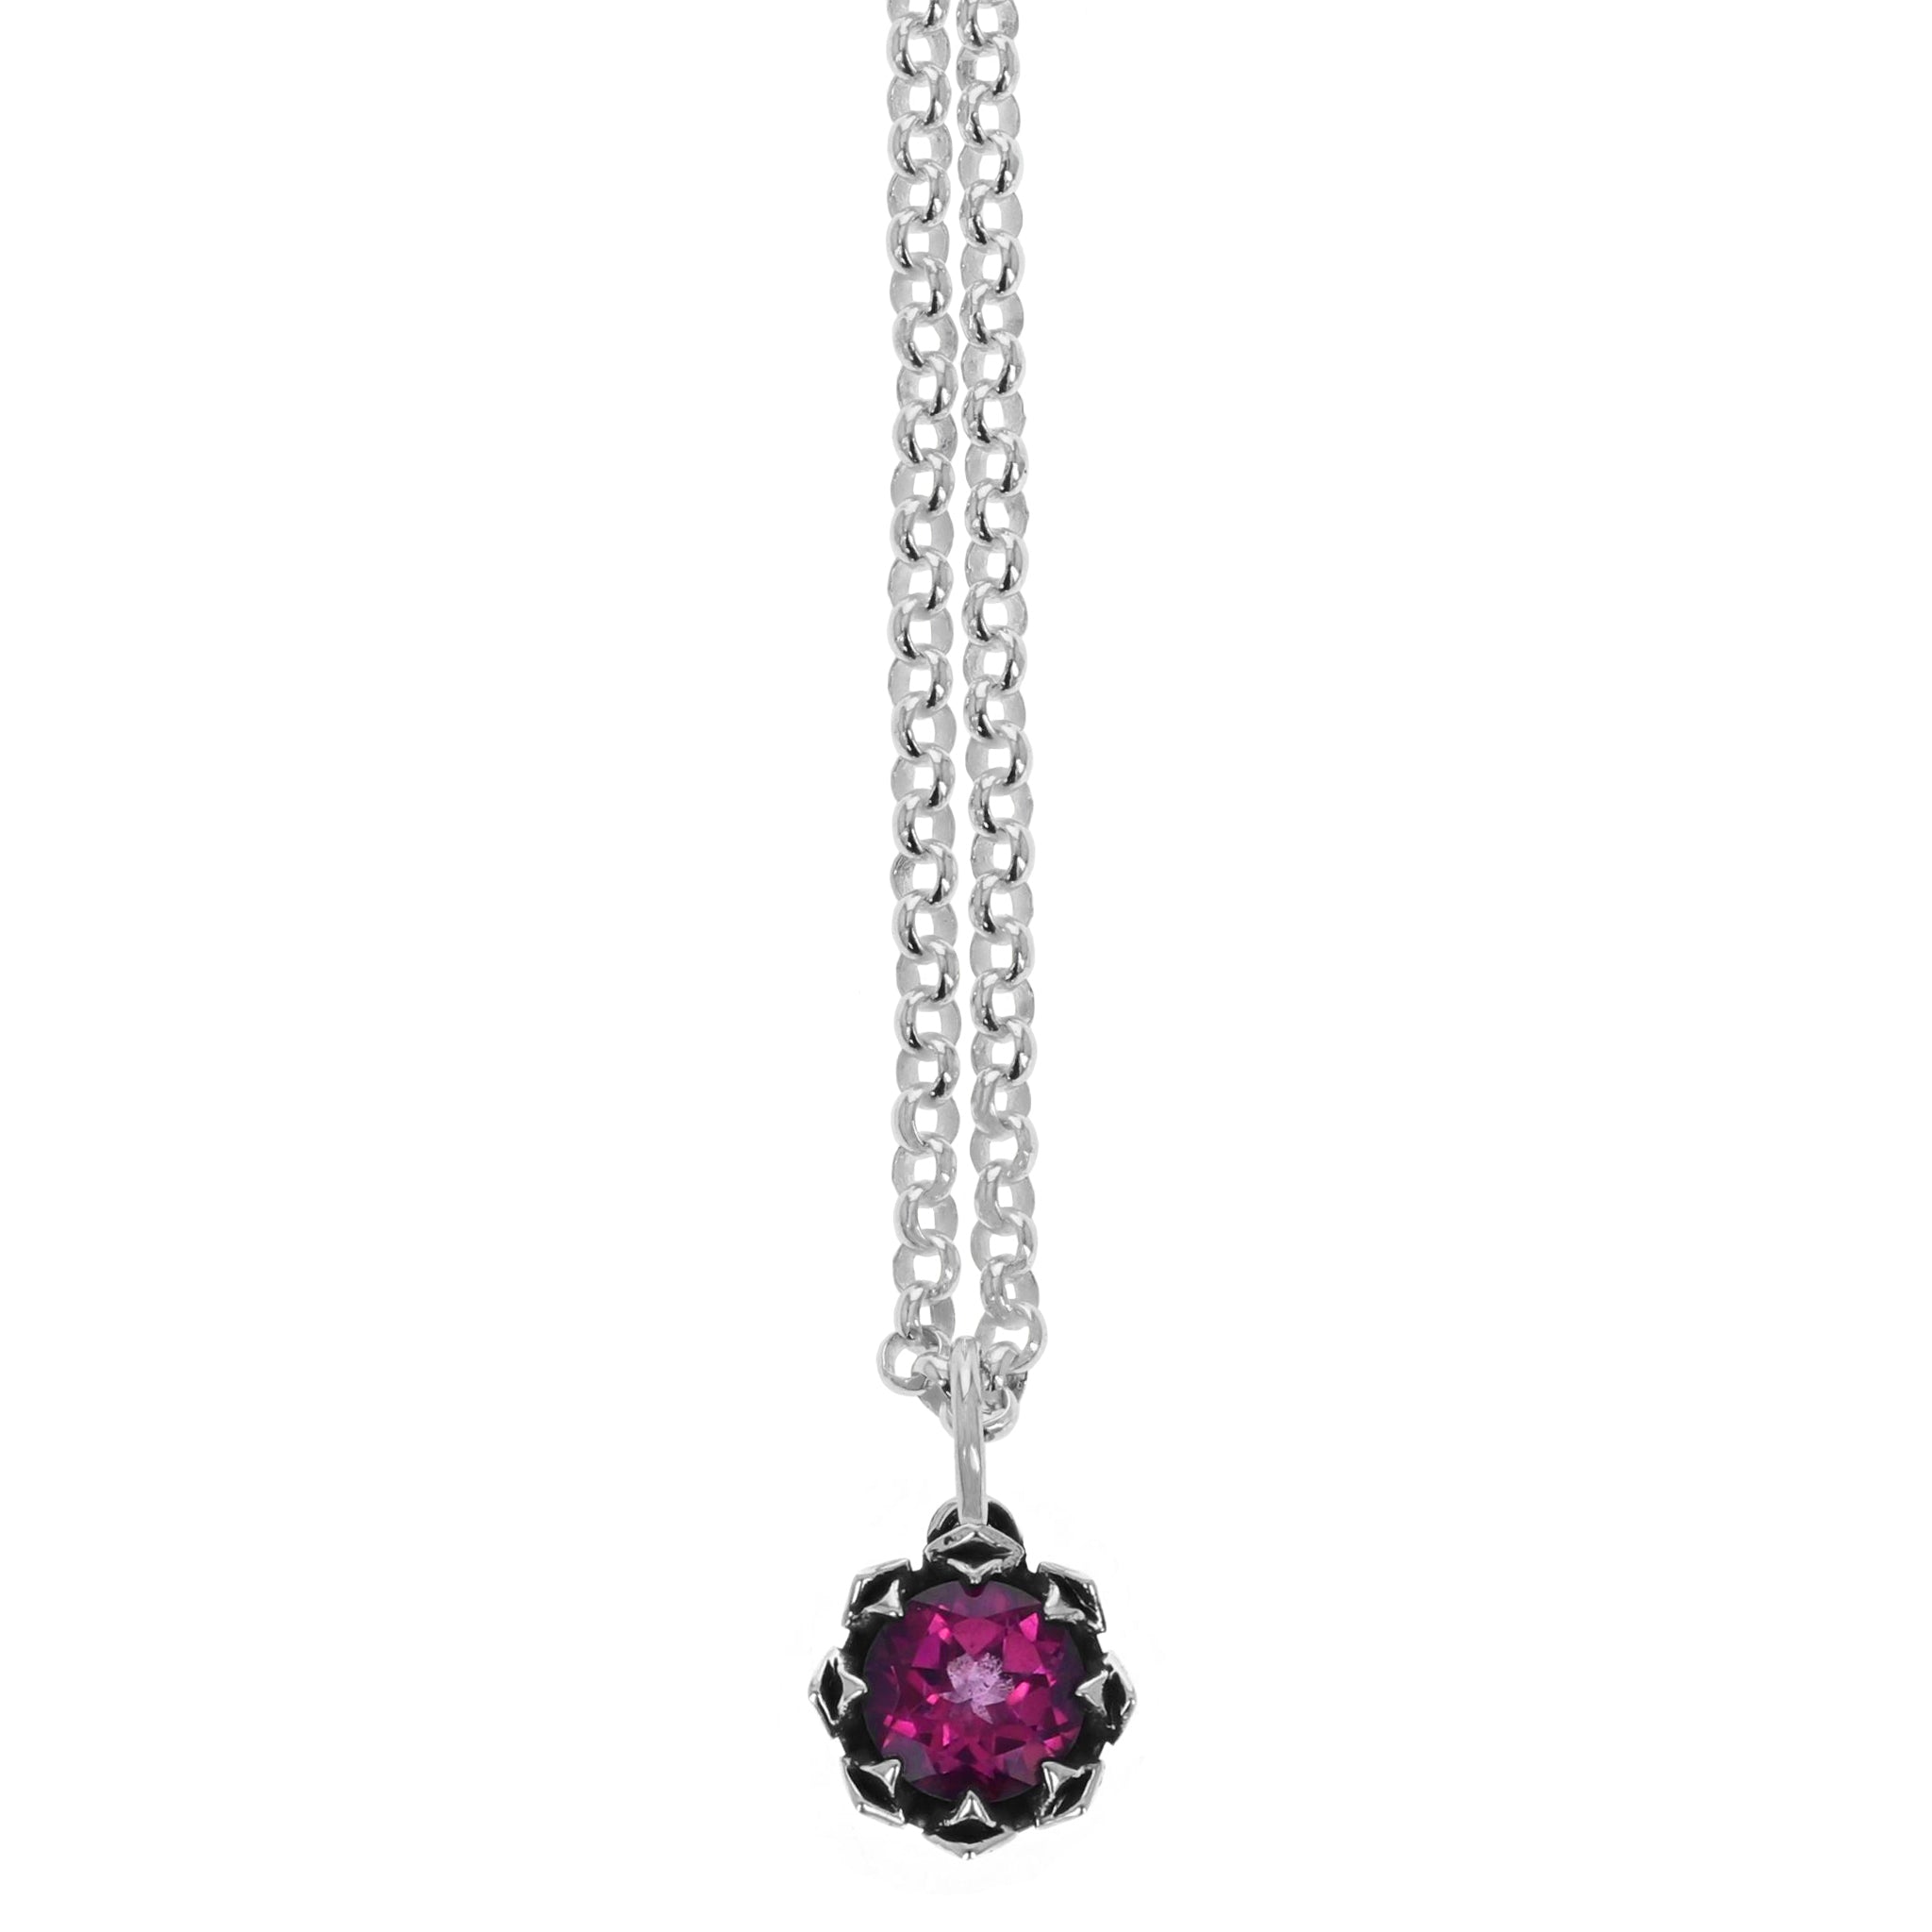 Crowned Pink Topaz Pendant w/ Micro Rolo Chain